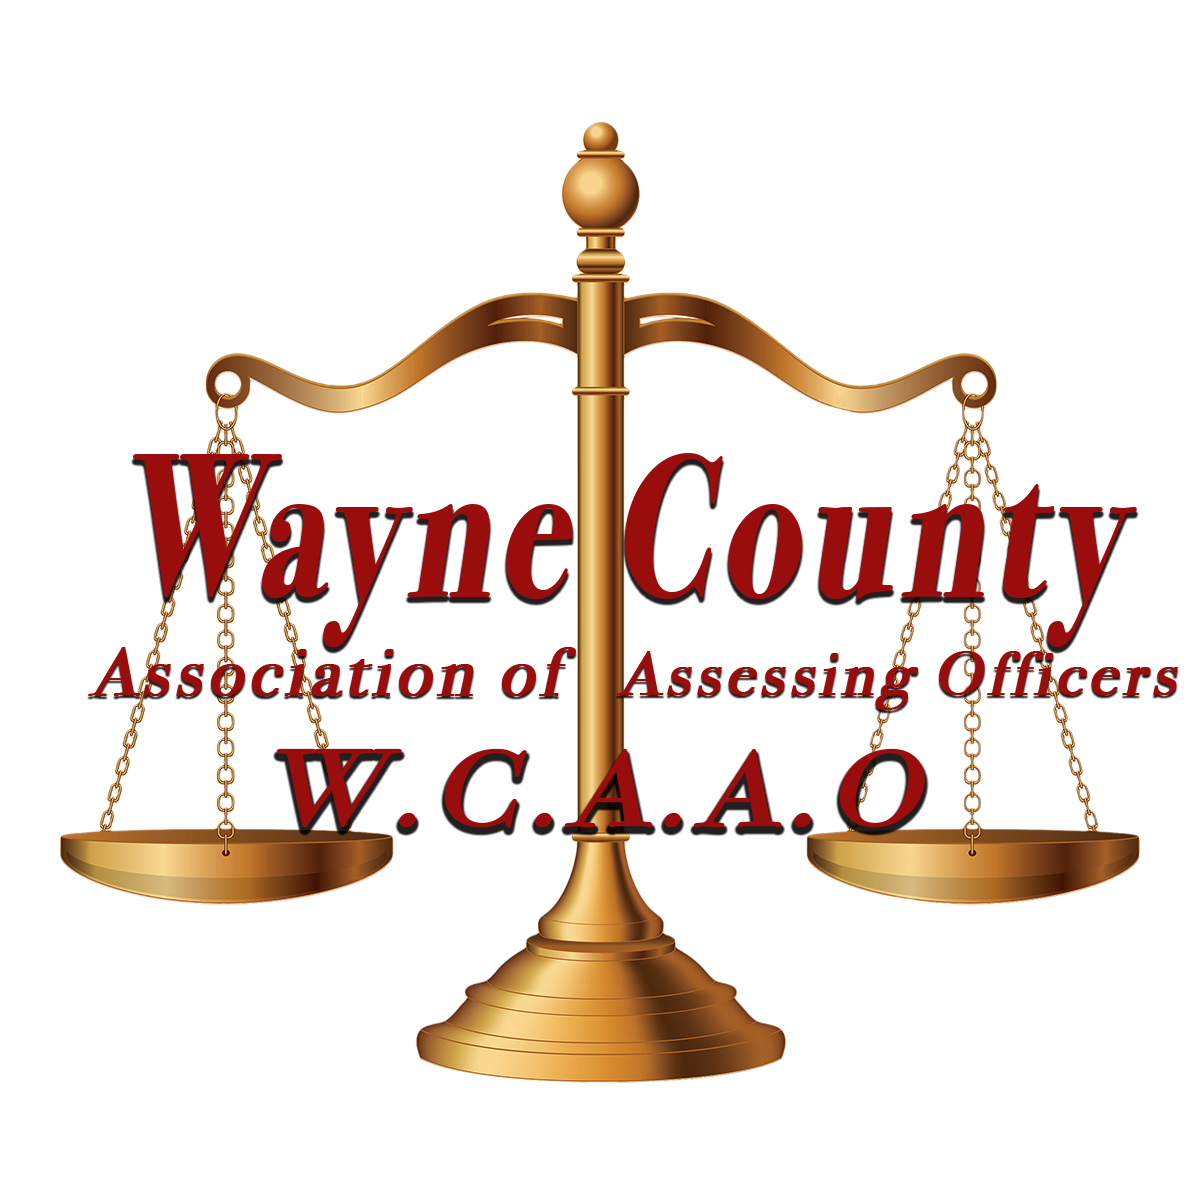 Wayne County Association of Assessing Officers